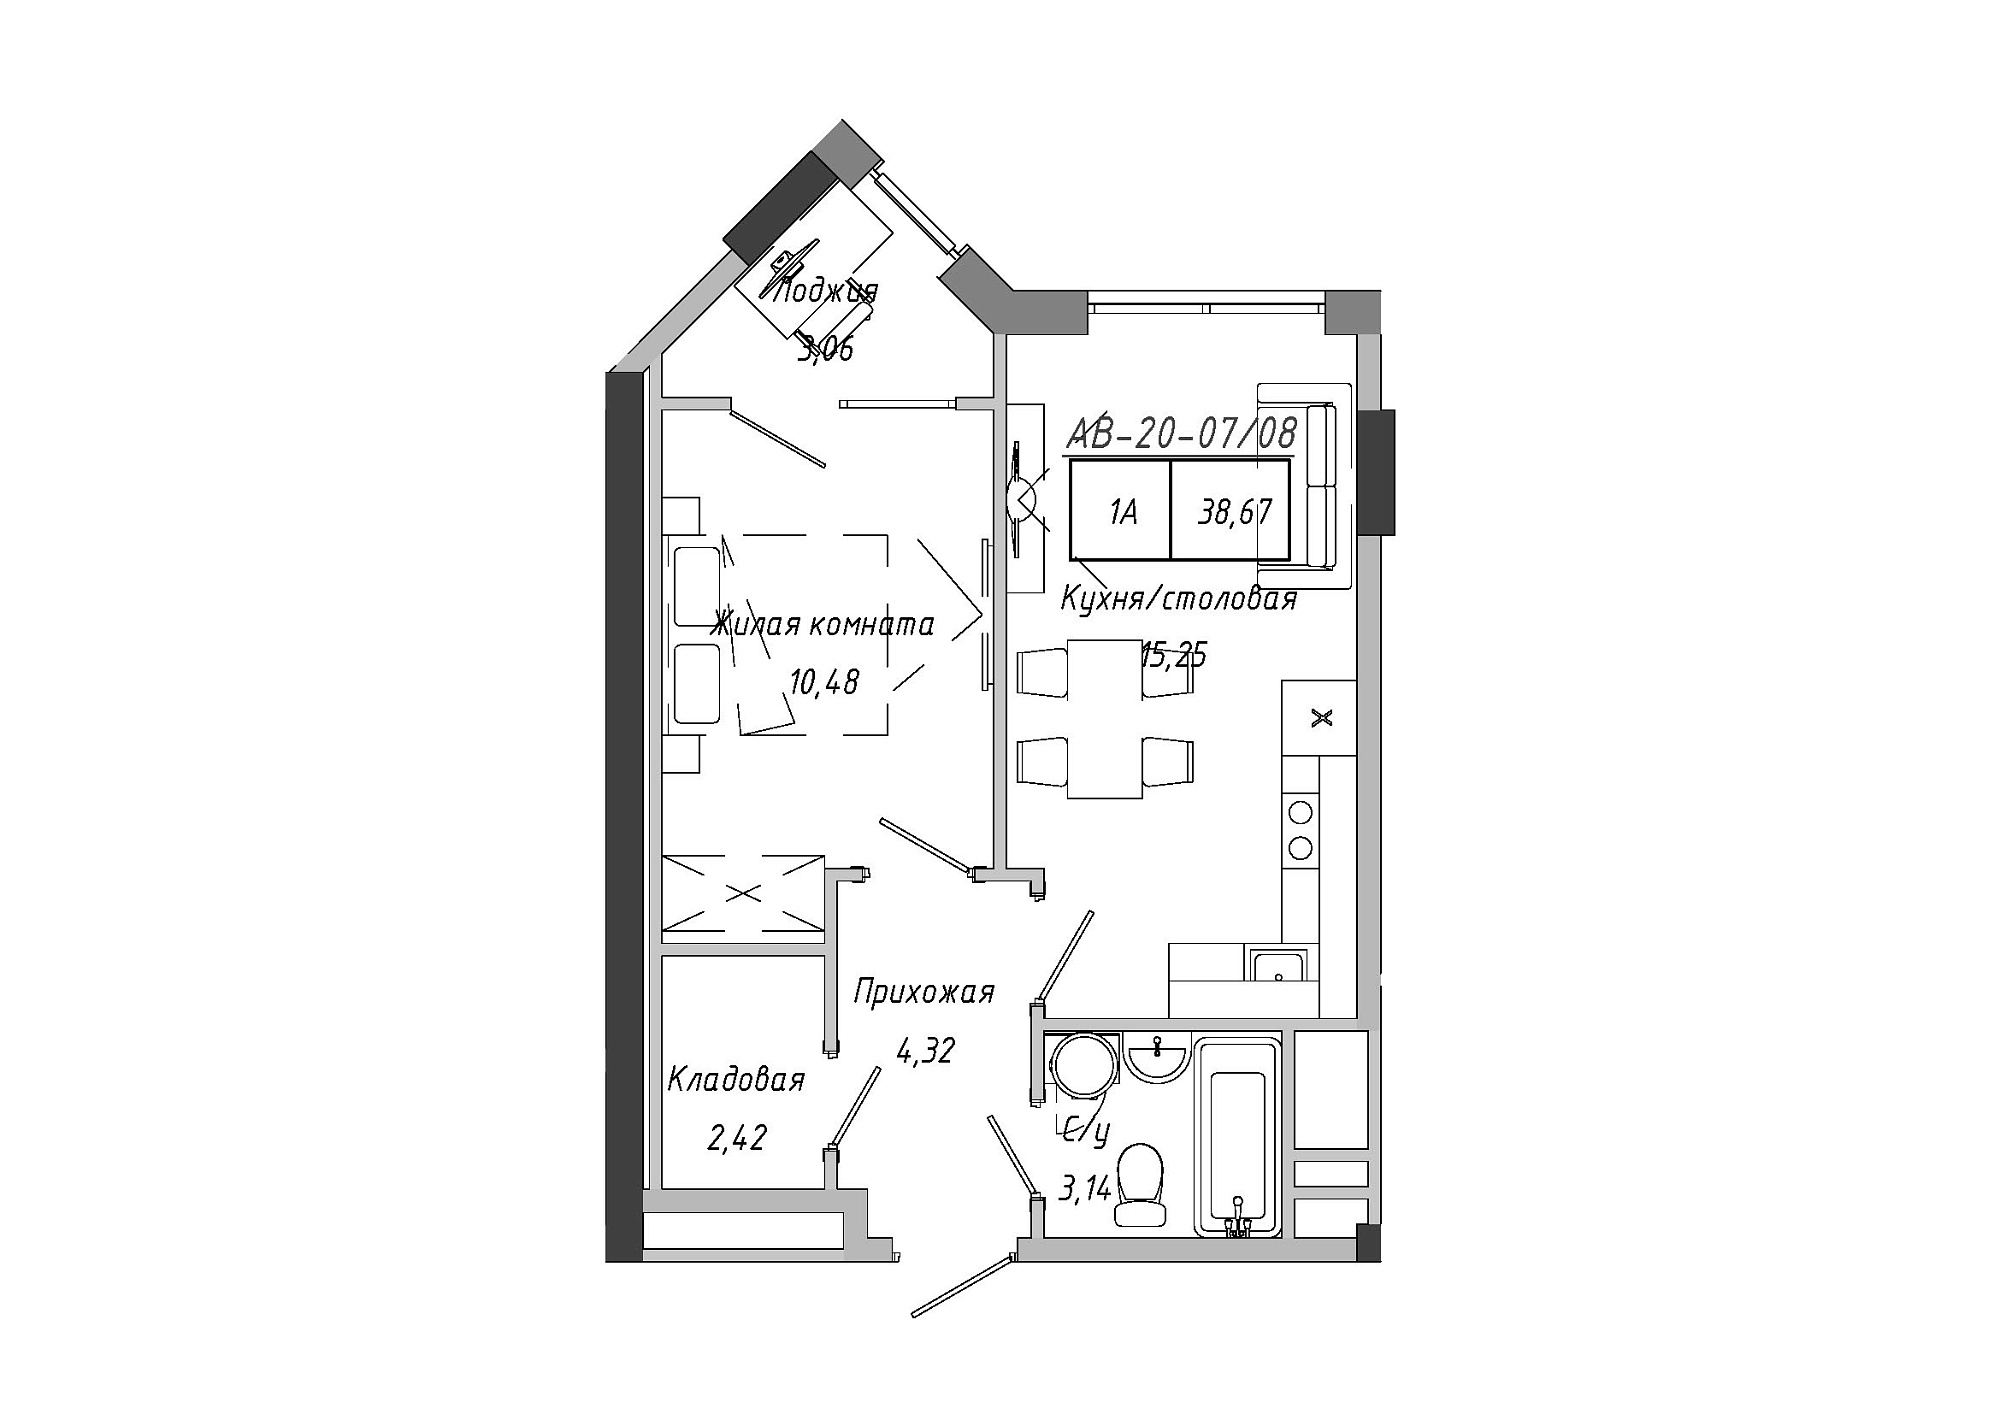 Planning 1-rm flats area 38.85m2, AB-20-07/00008.